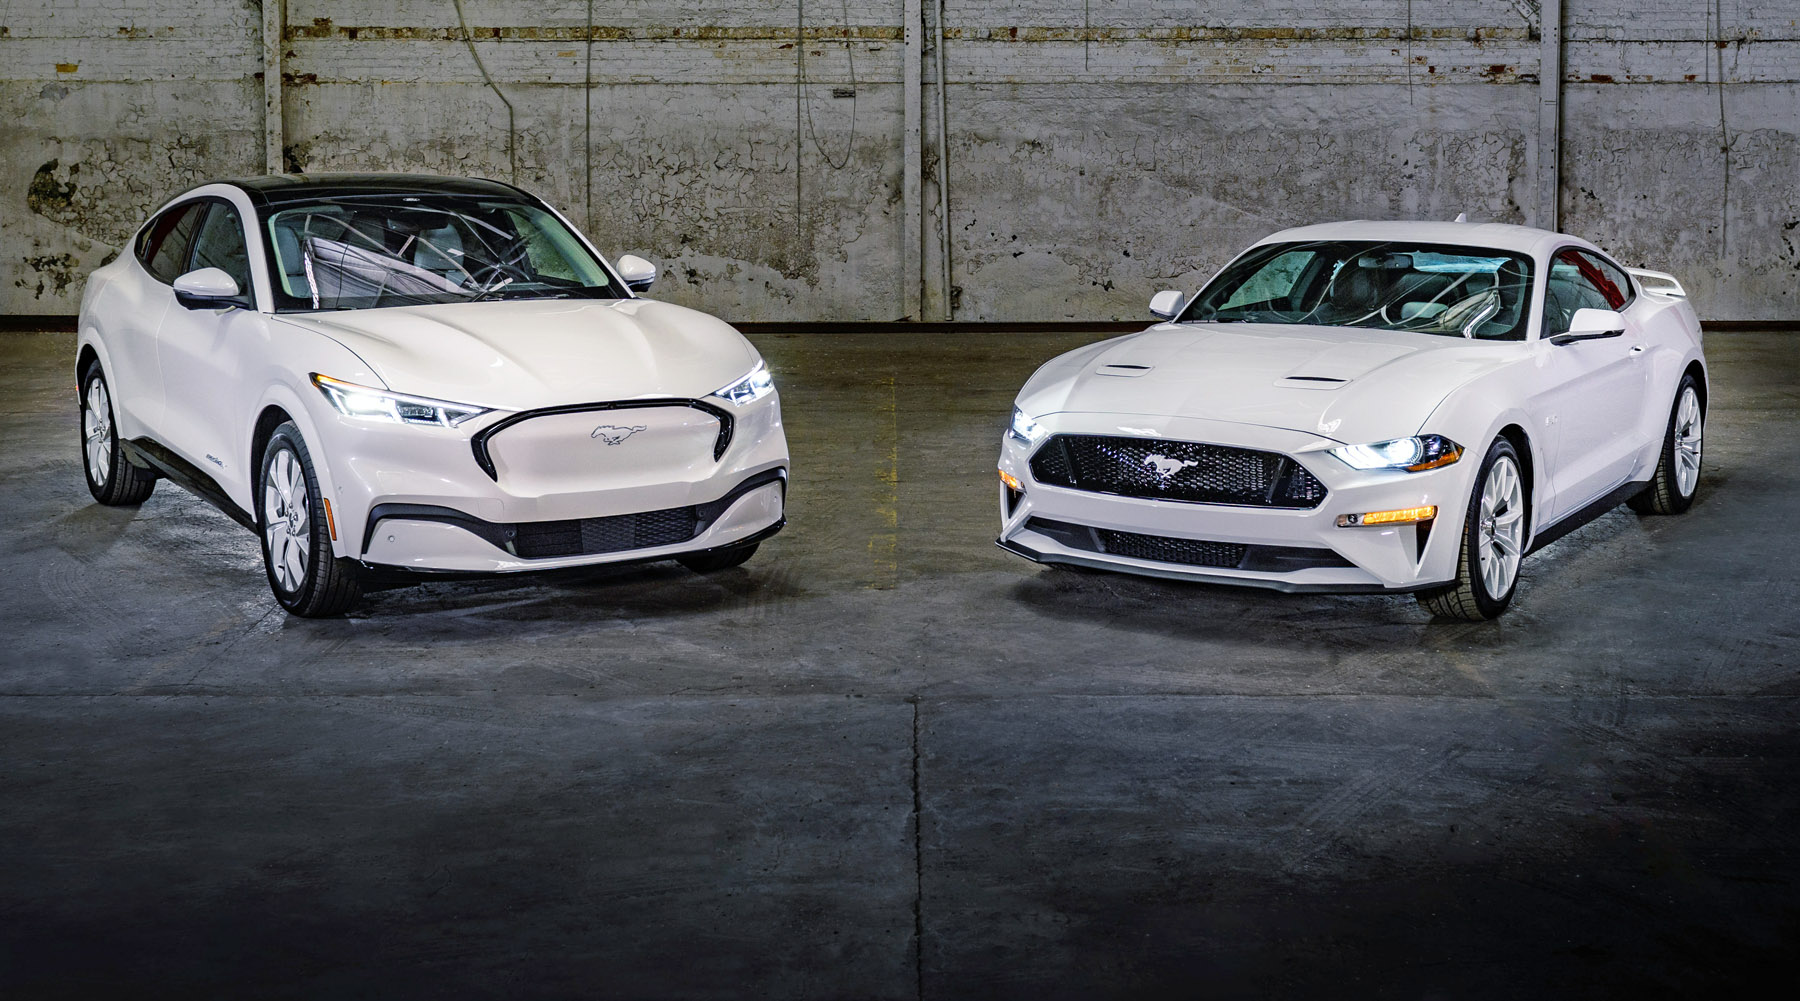 2023 Ford Mustang Mach-E, Ford slashes prices on Mustang Mach-E